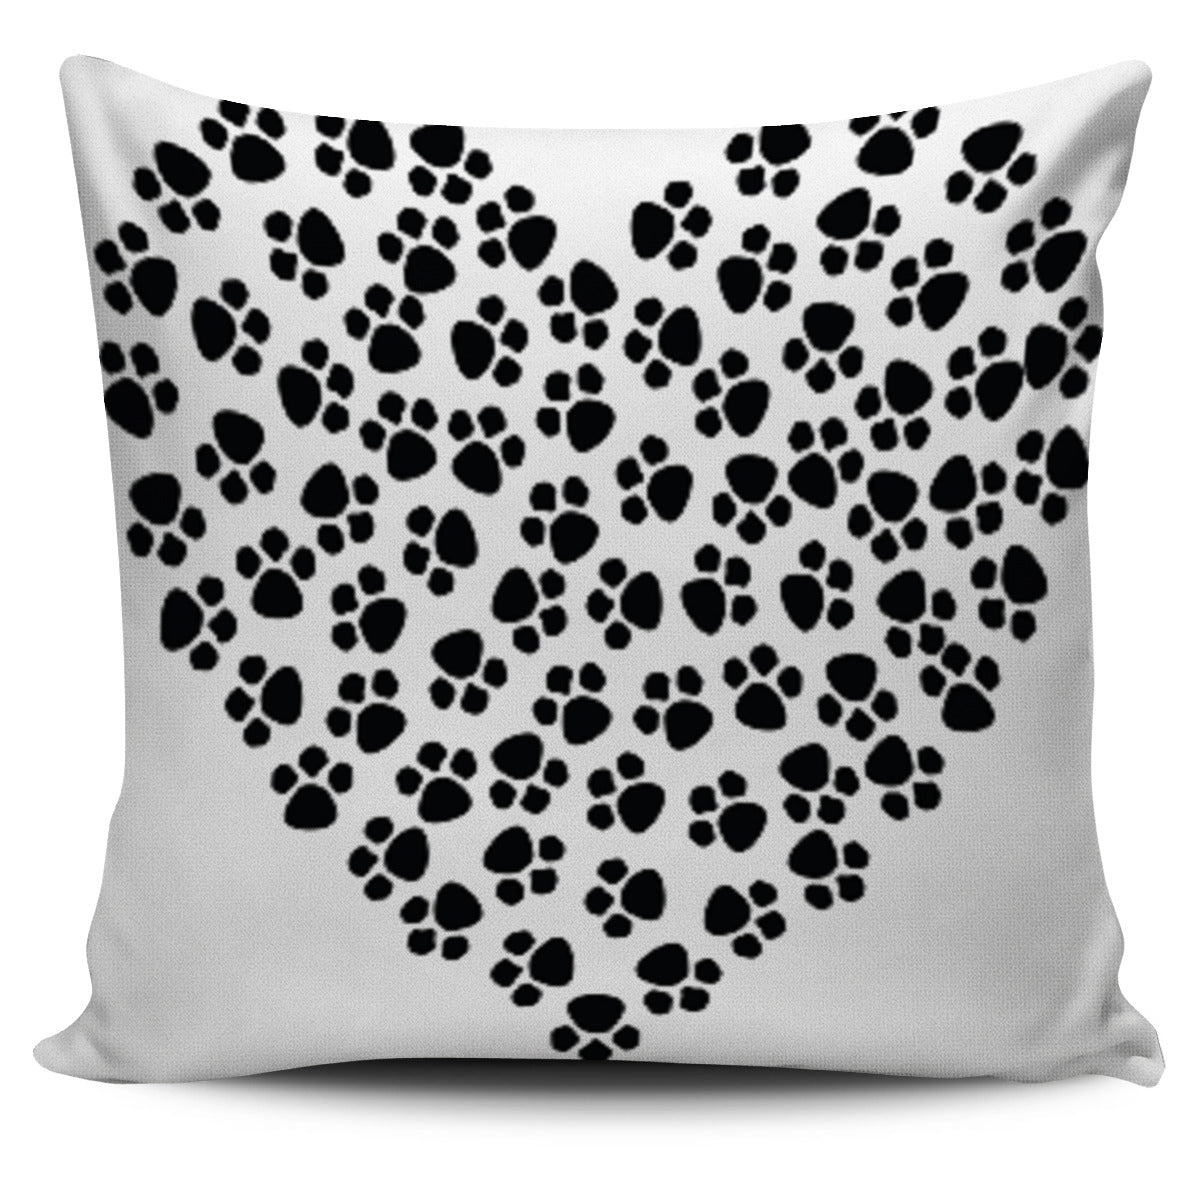 Paw Love Pillow Cover